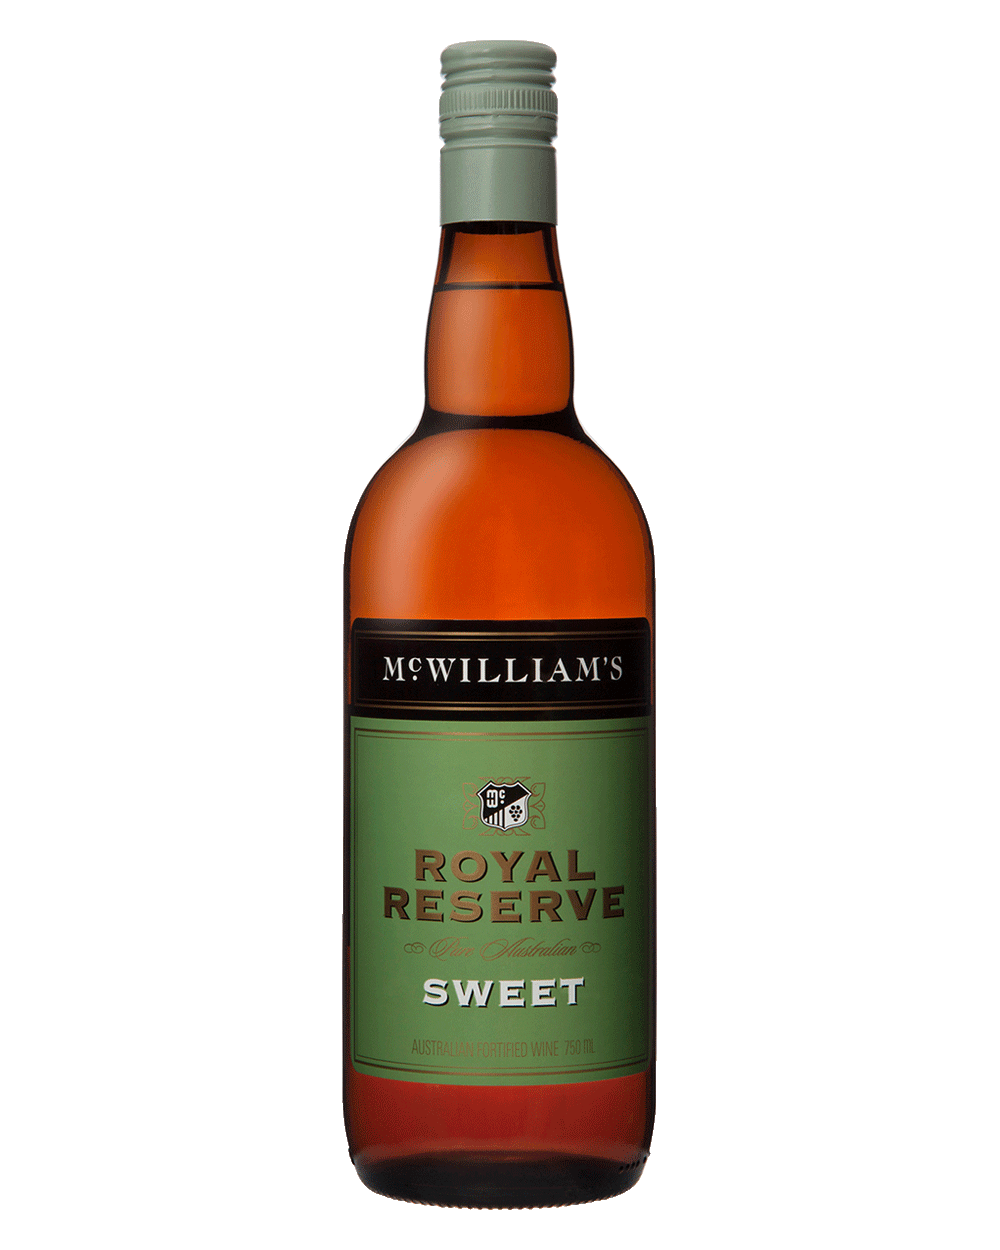 Mcwilliams-Royal-Reserve-Sweet-Sherry